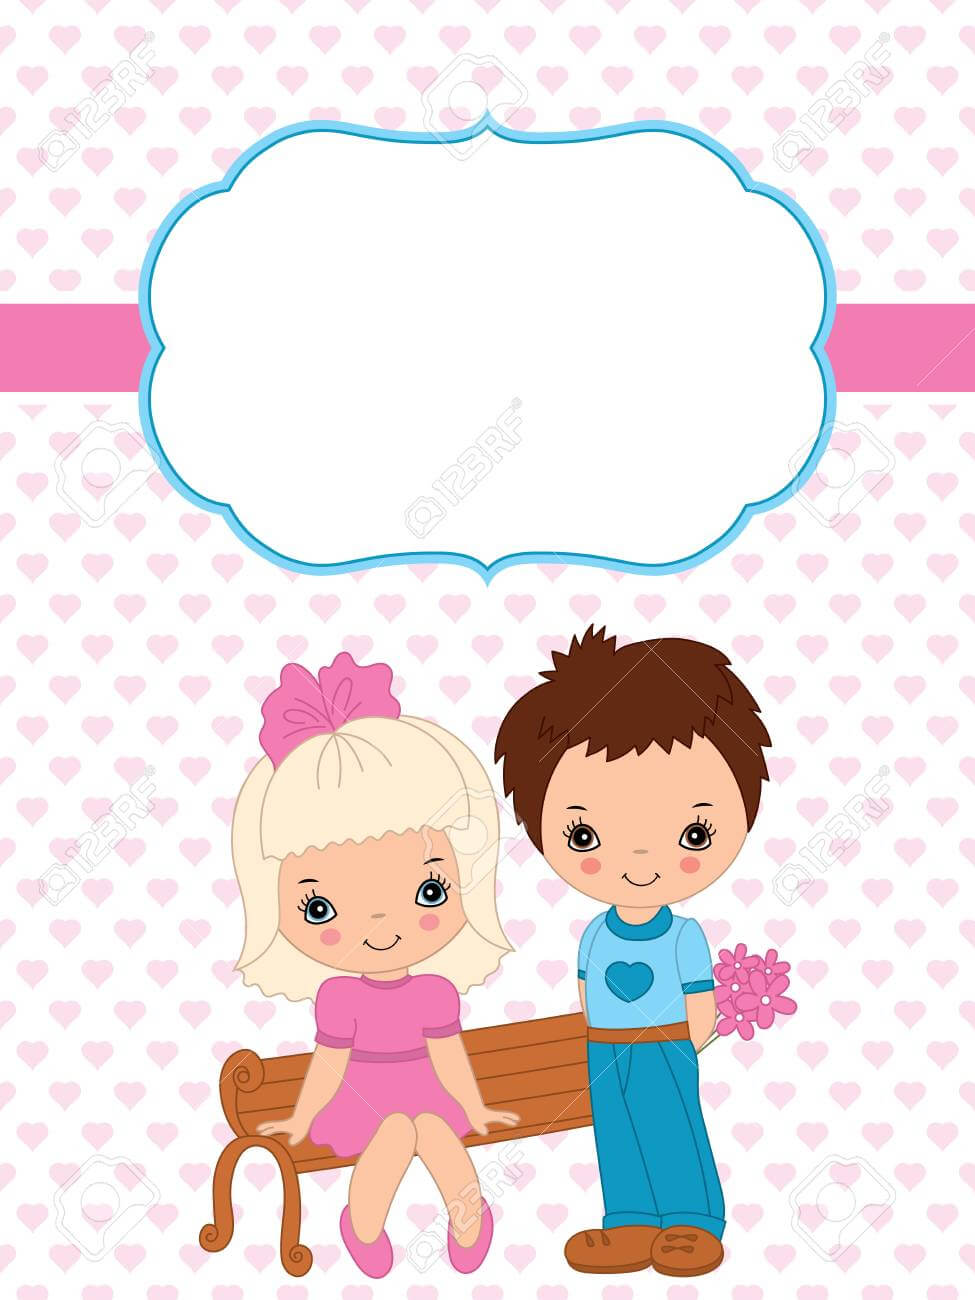 Valentine's Card Vector Template With Cute Little Kids On Hearts.. Throughout Valentine Card Template For Kids